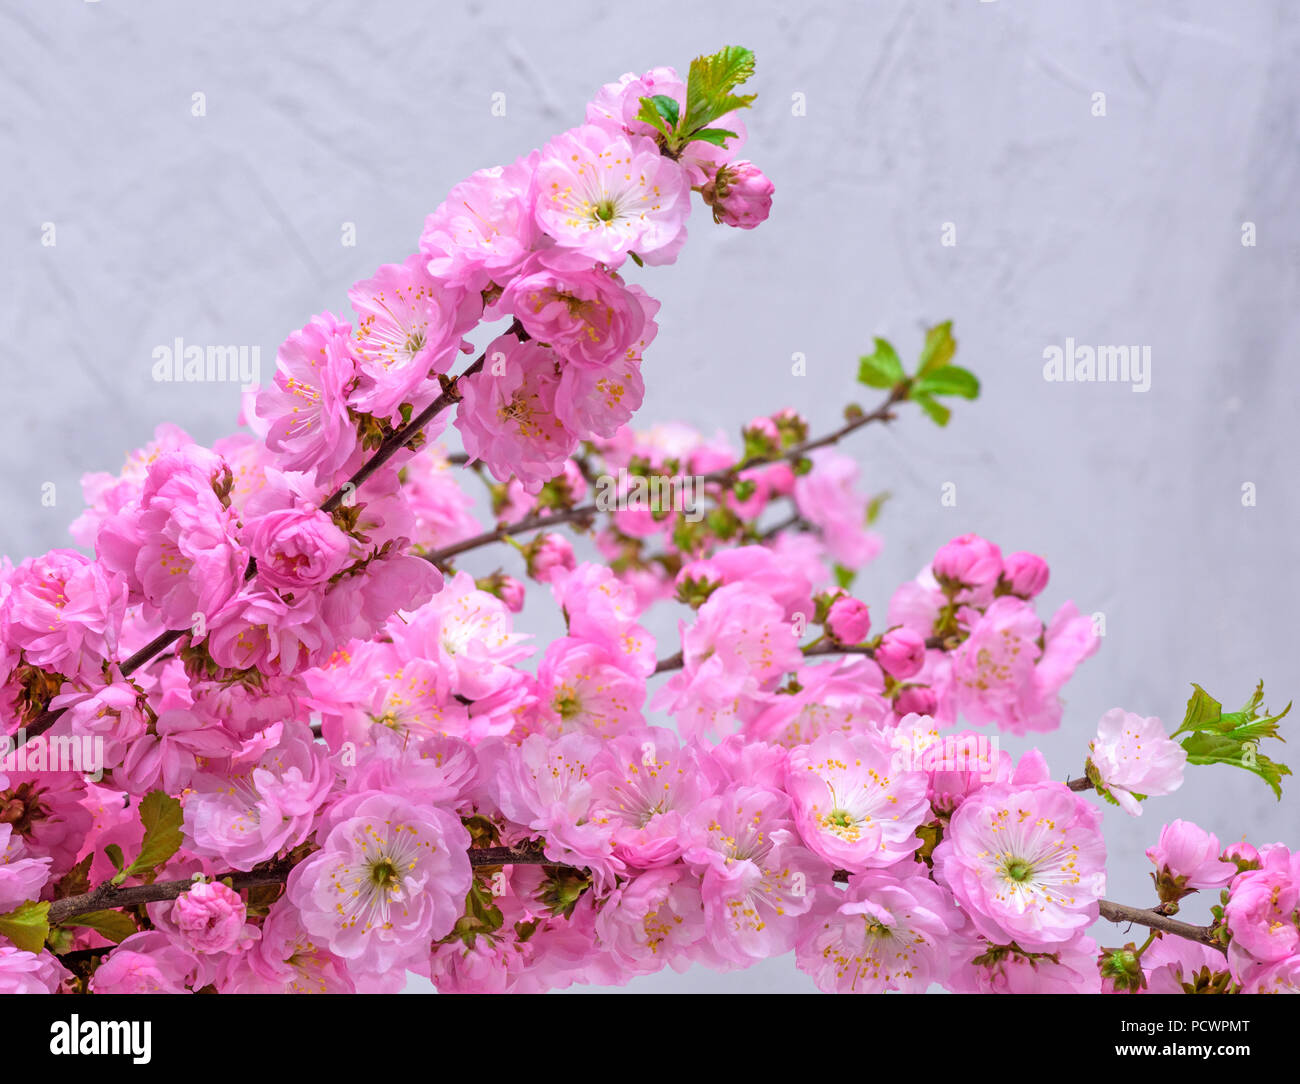 branches with pink flowers Louiseania triloba on a gray background Stock Photo